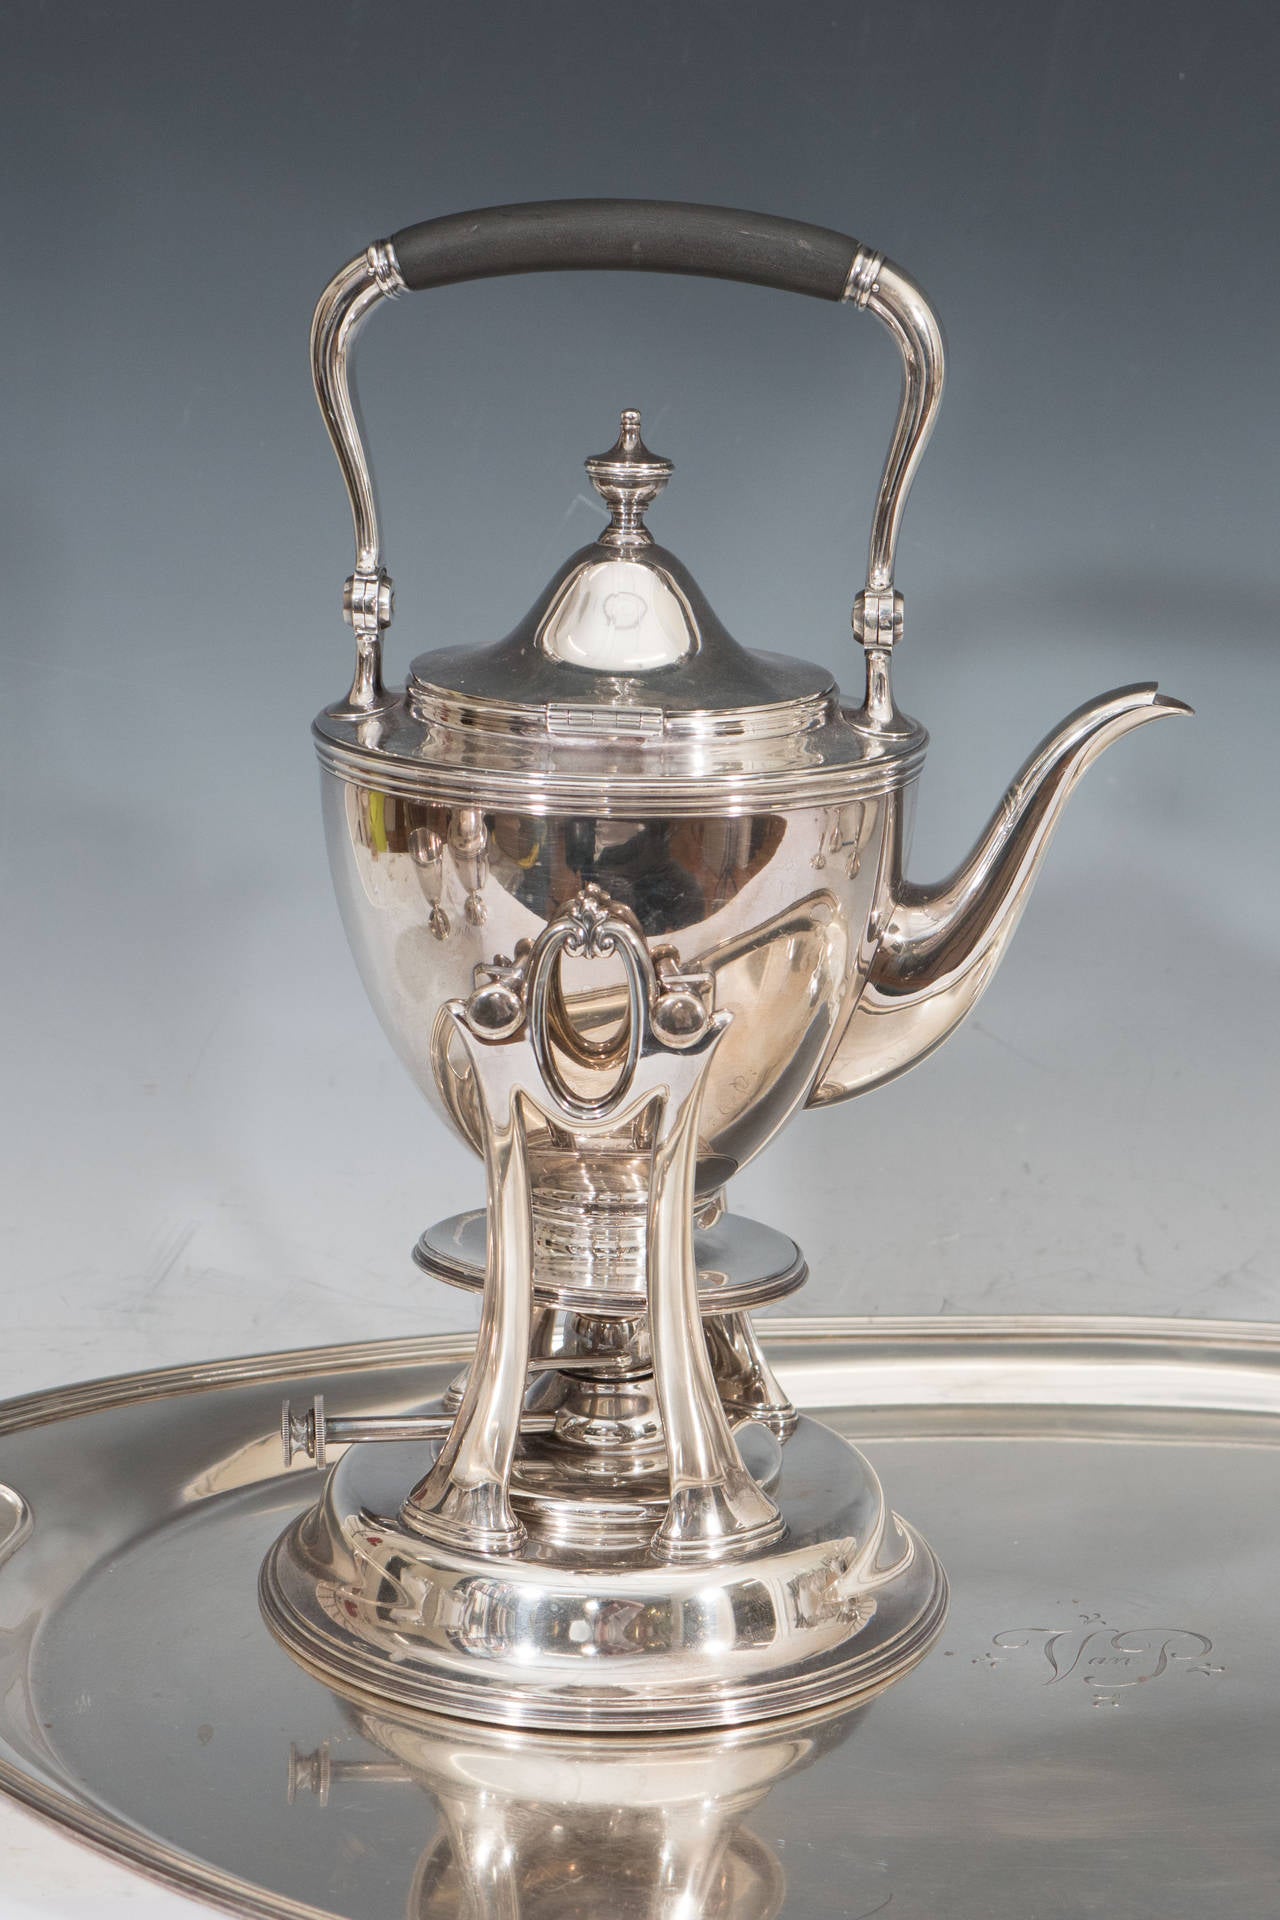 A Tiffany & Co maker's sterling silver tea set, 1938 complete with serving tray. Each piece is engraved 